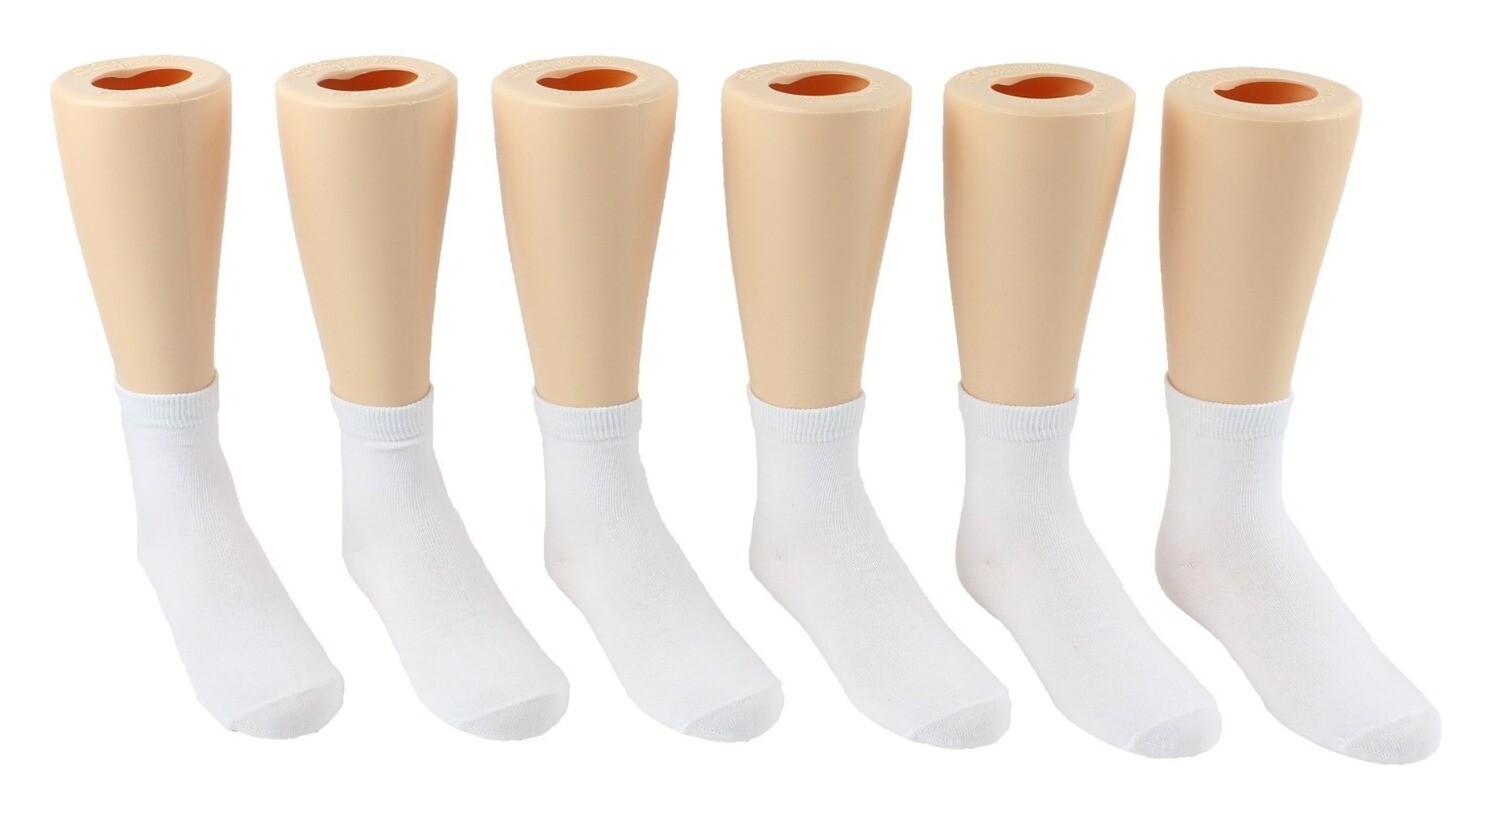 . Case of [360] Toddlers' White Crew Socks - Ages 1-3, 3 Pack .